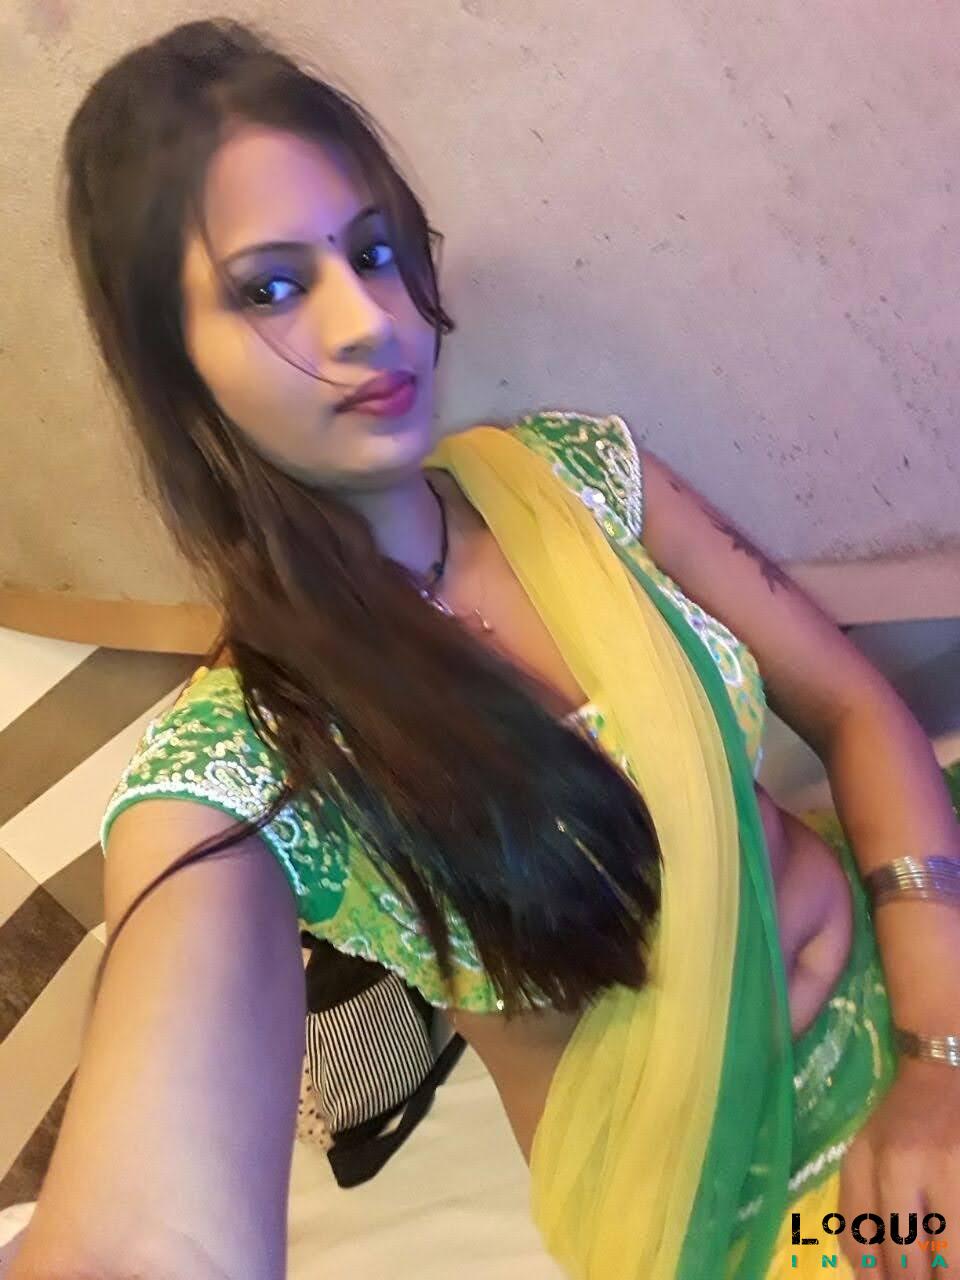 Call Girls West Bengal: Bolpur Call ma❤️93341*57647❤️Low price call girl 100% TRUSTED cc